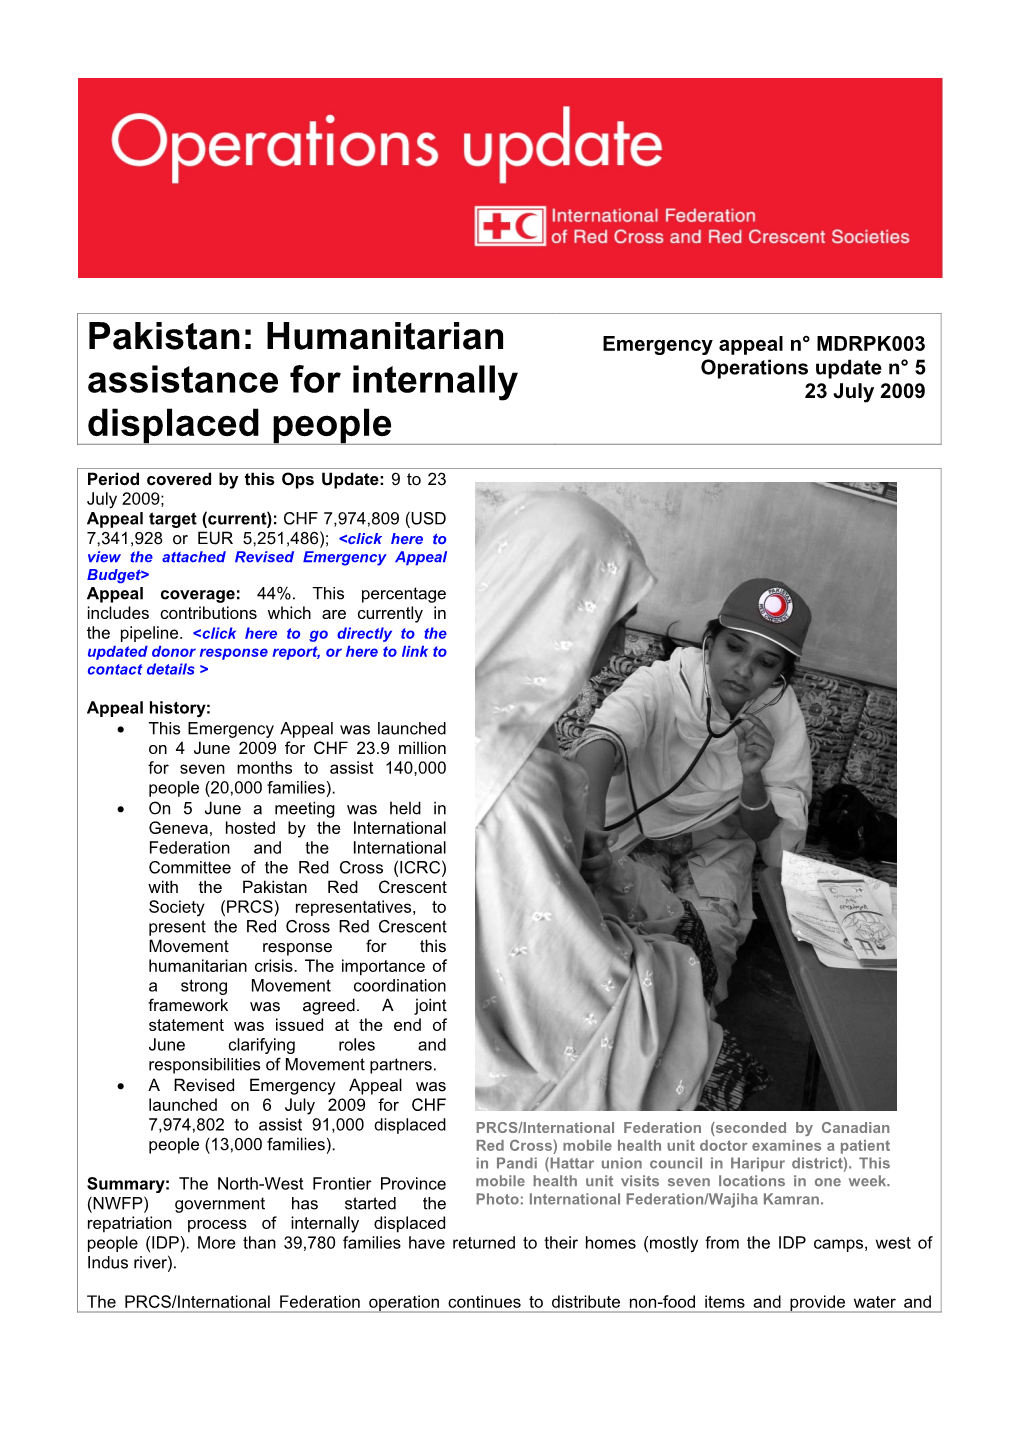 Pakistan: Humanitarian Assistance for Internally Displaced People